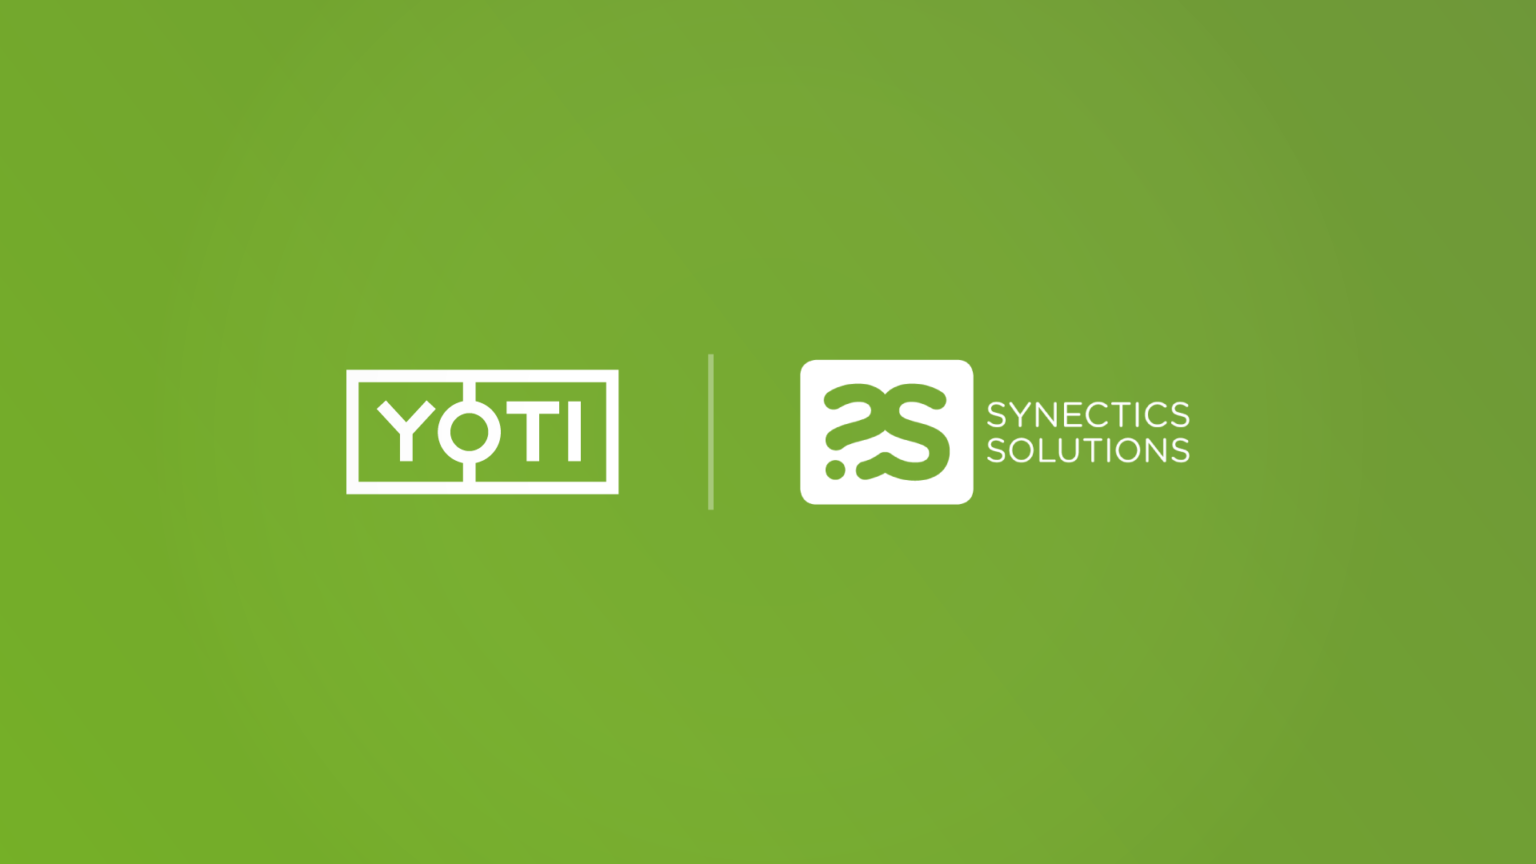 Yoti and Synetics Solutions partner to fight financial crime